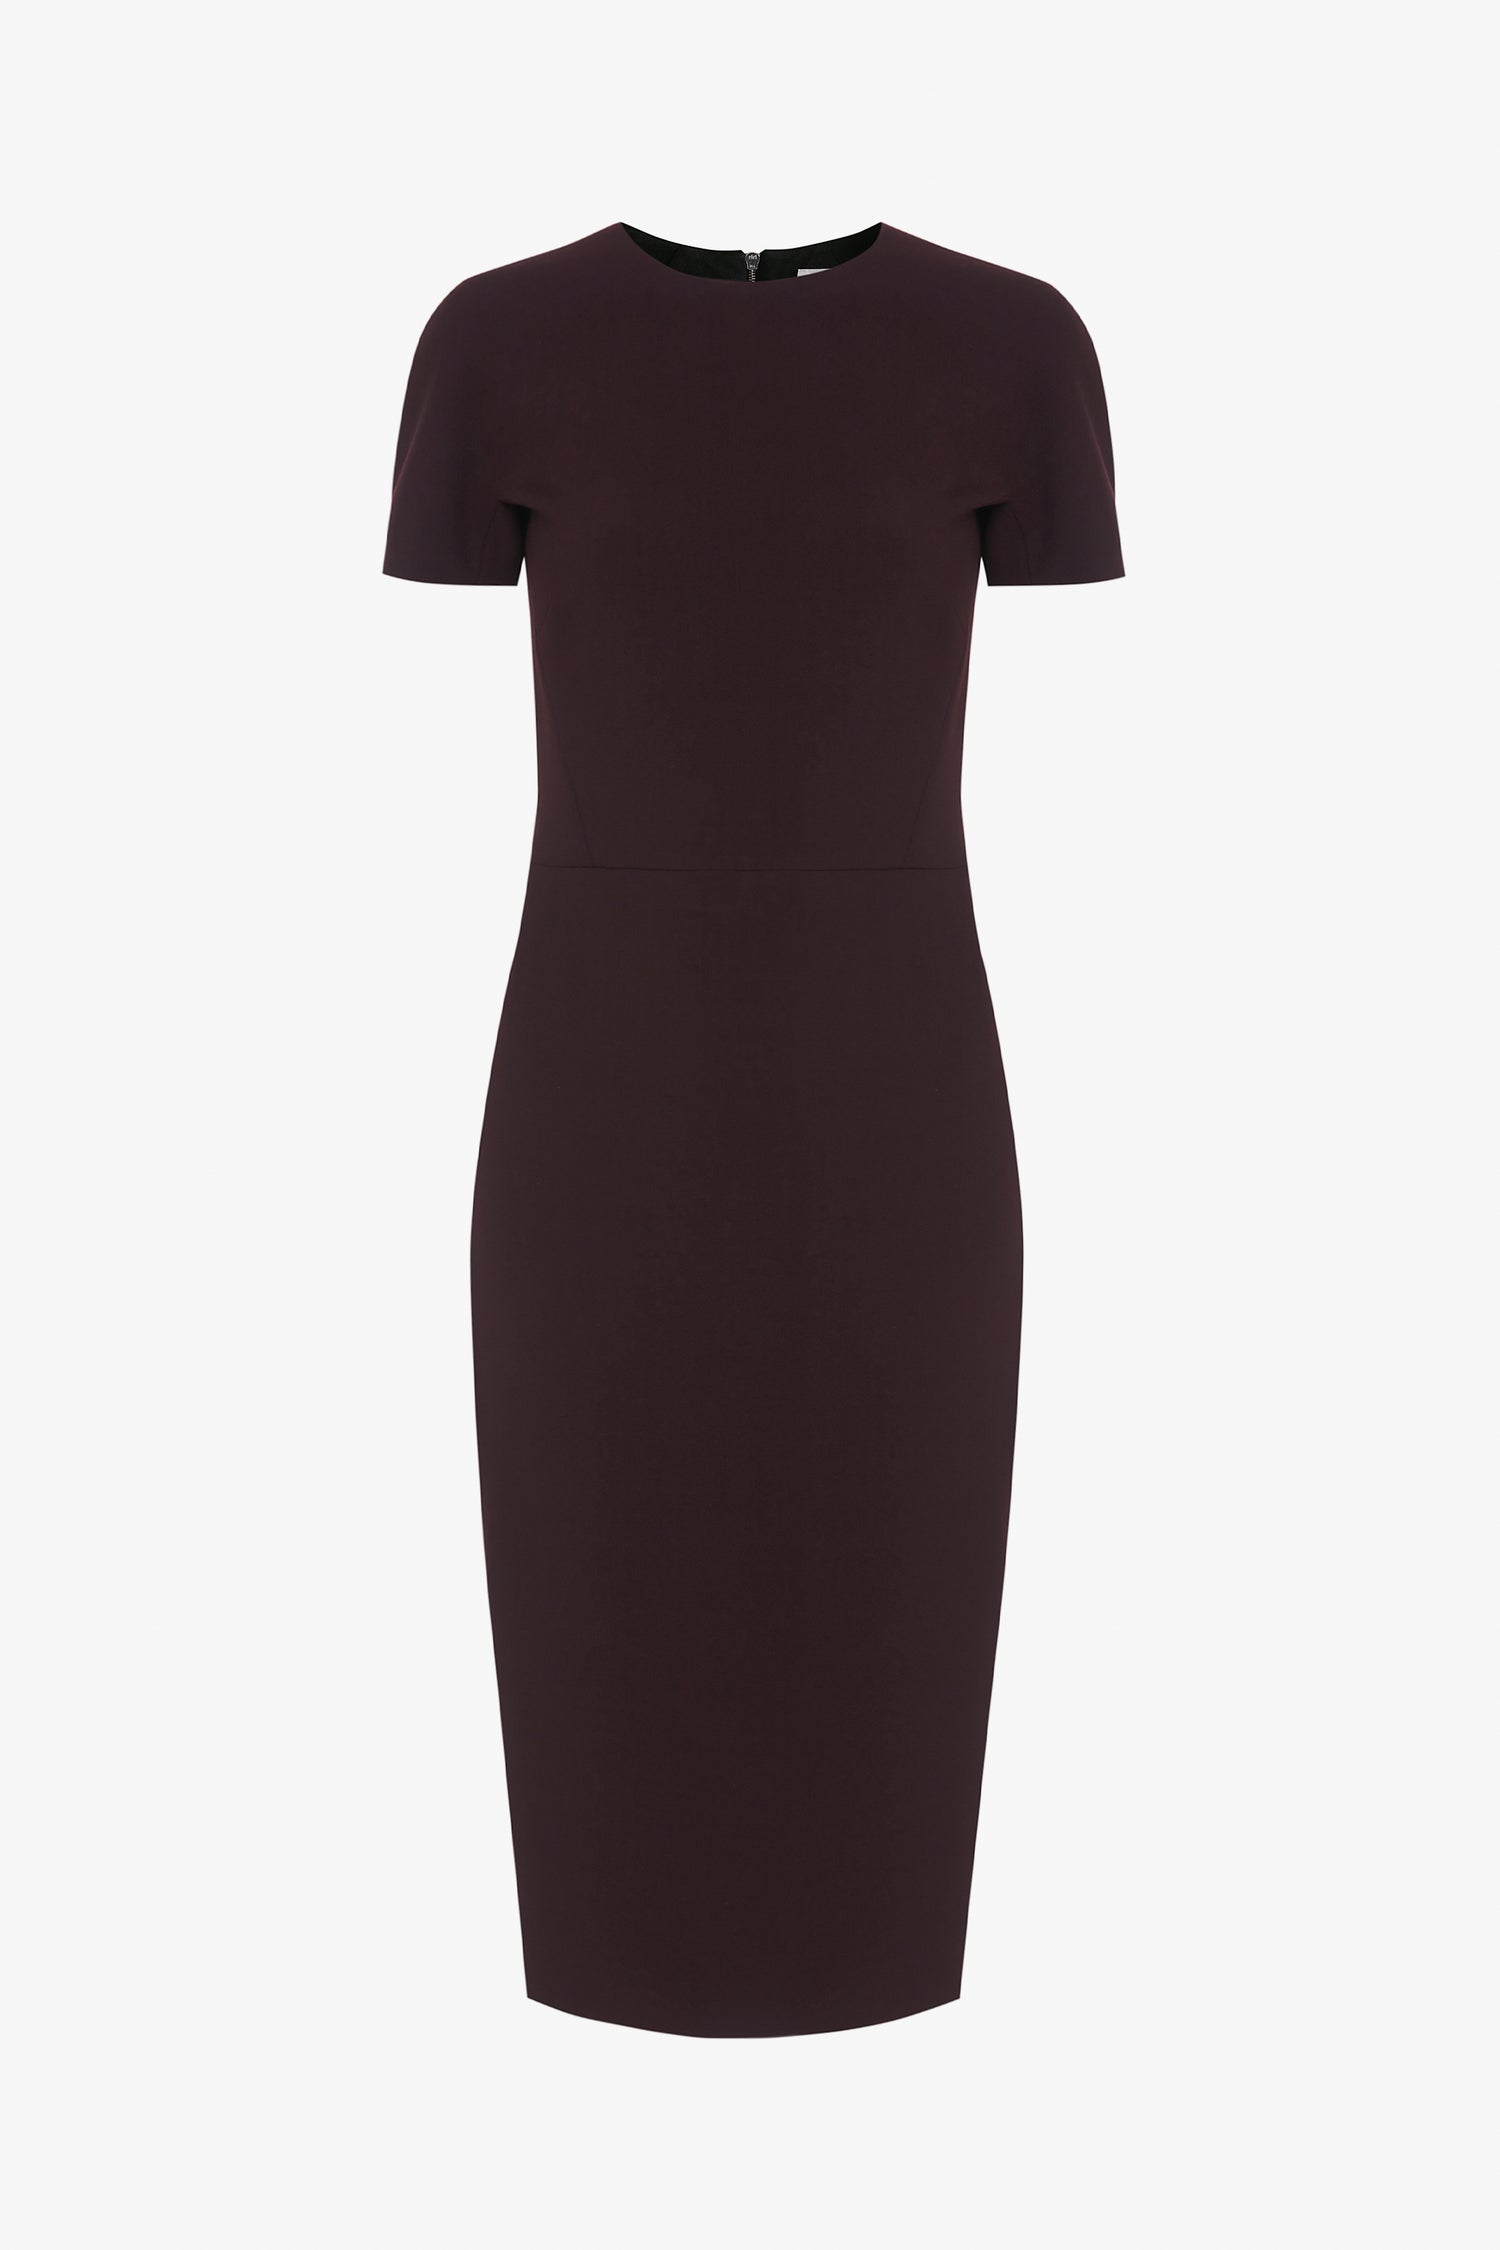 A short-sleeved, dark purple, knee-length Fitted T-Shirt Dress In Deep Mahogany by Victoria Beckham on a plain white background.